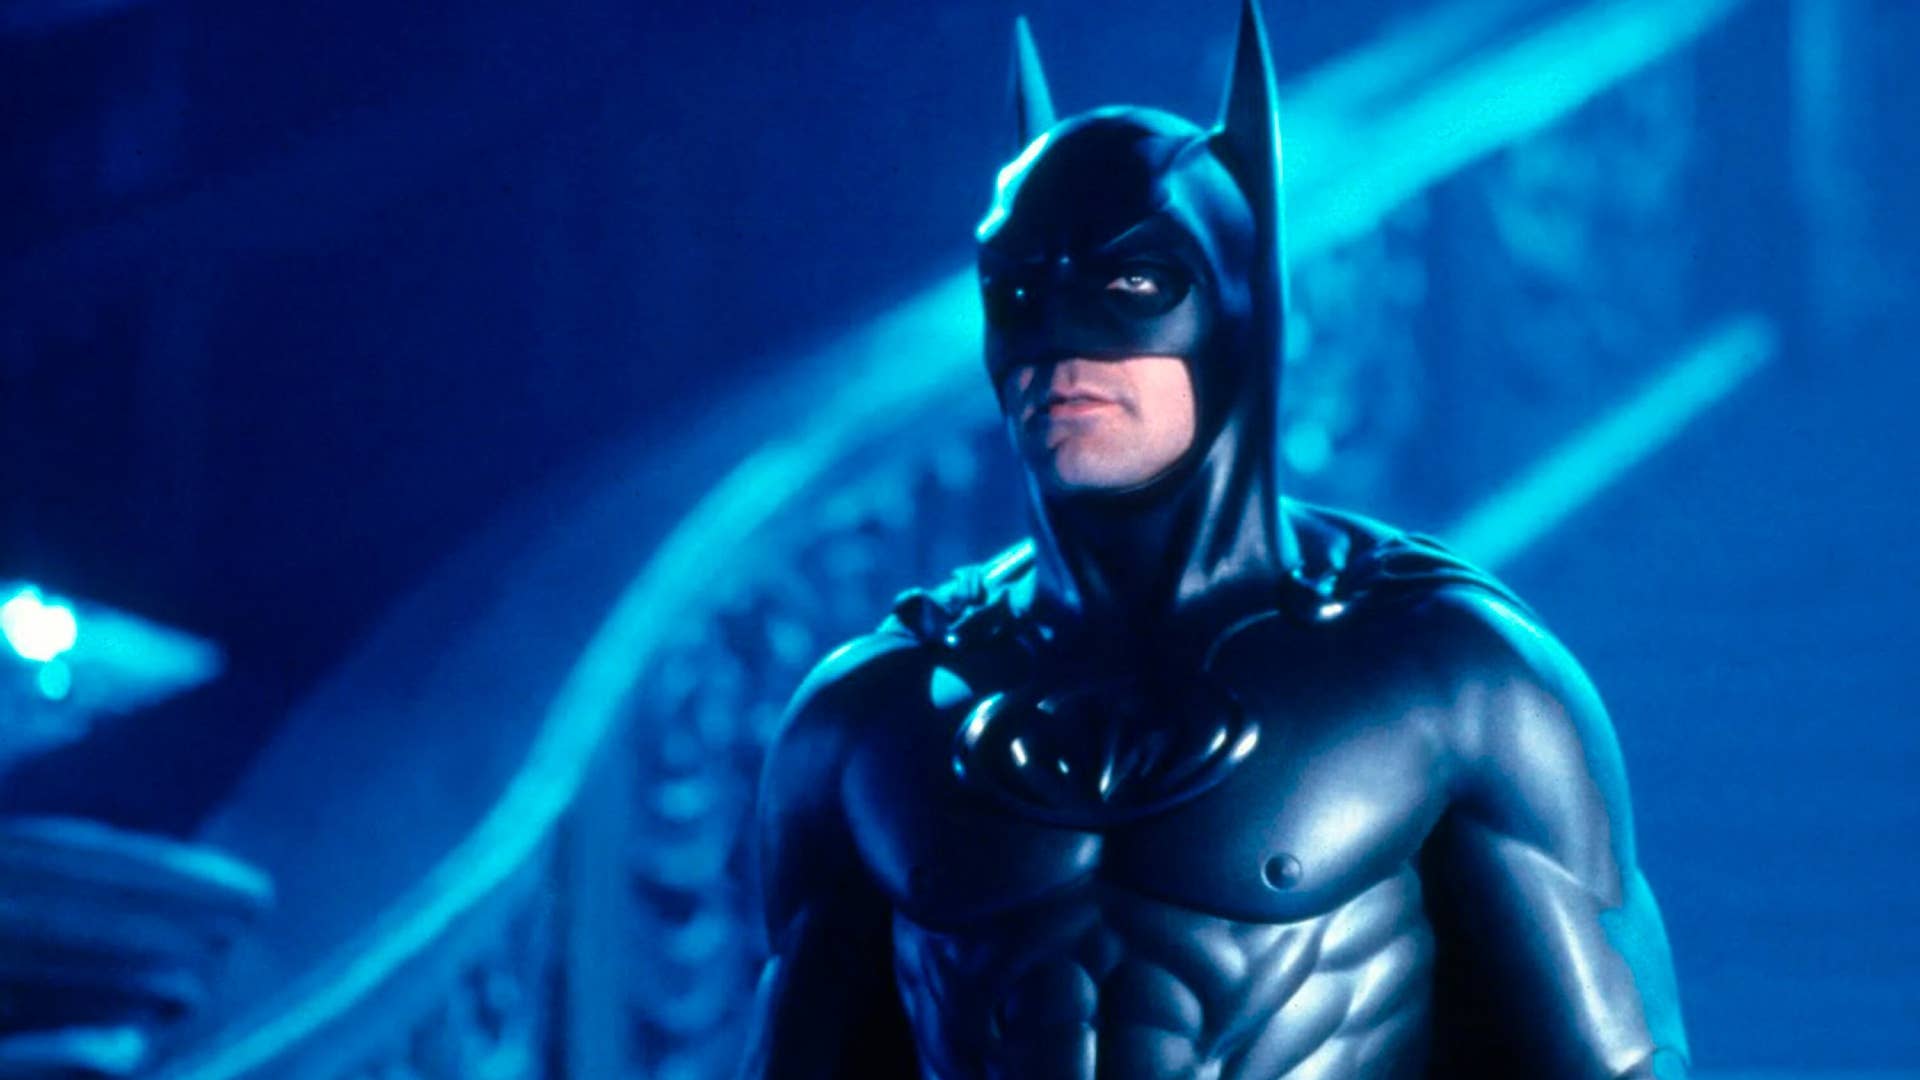 Batman is seen with a nipple suit